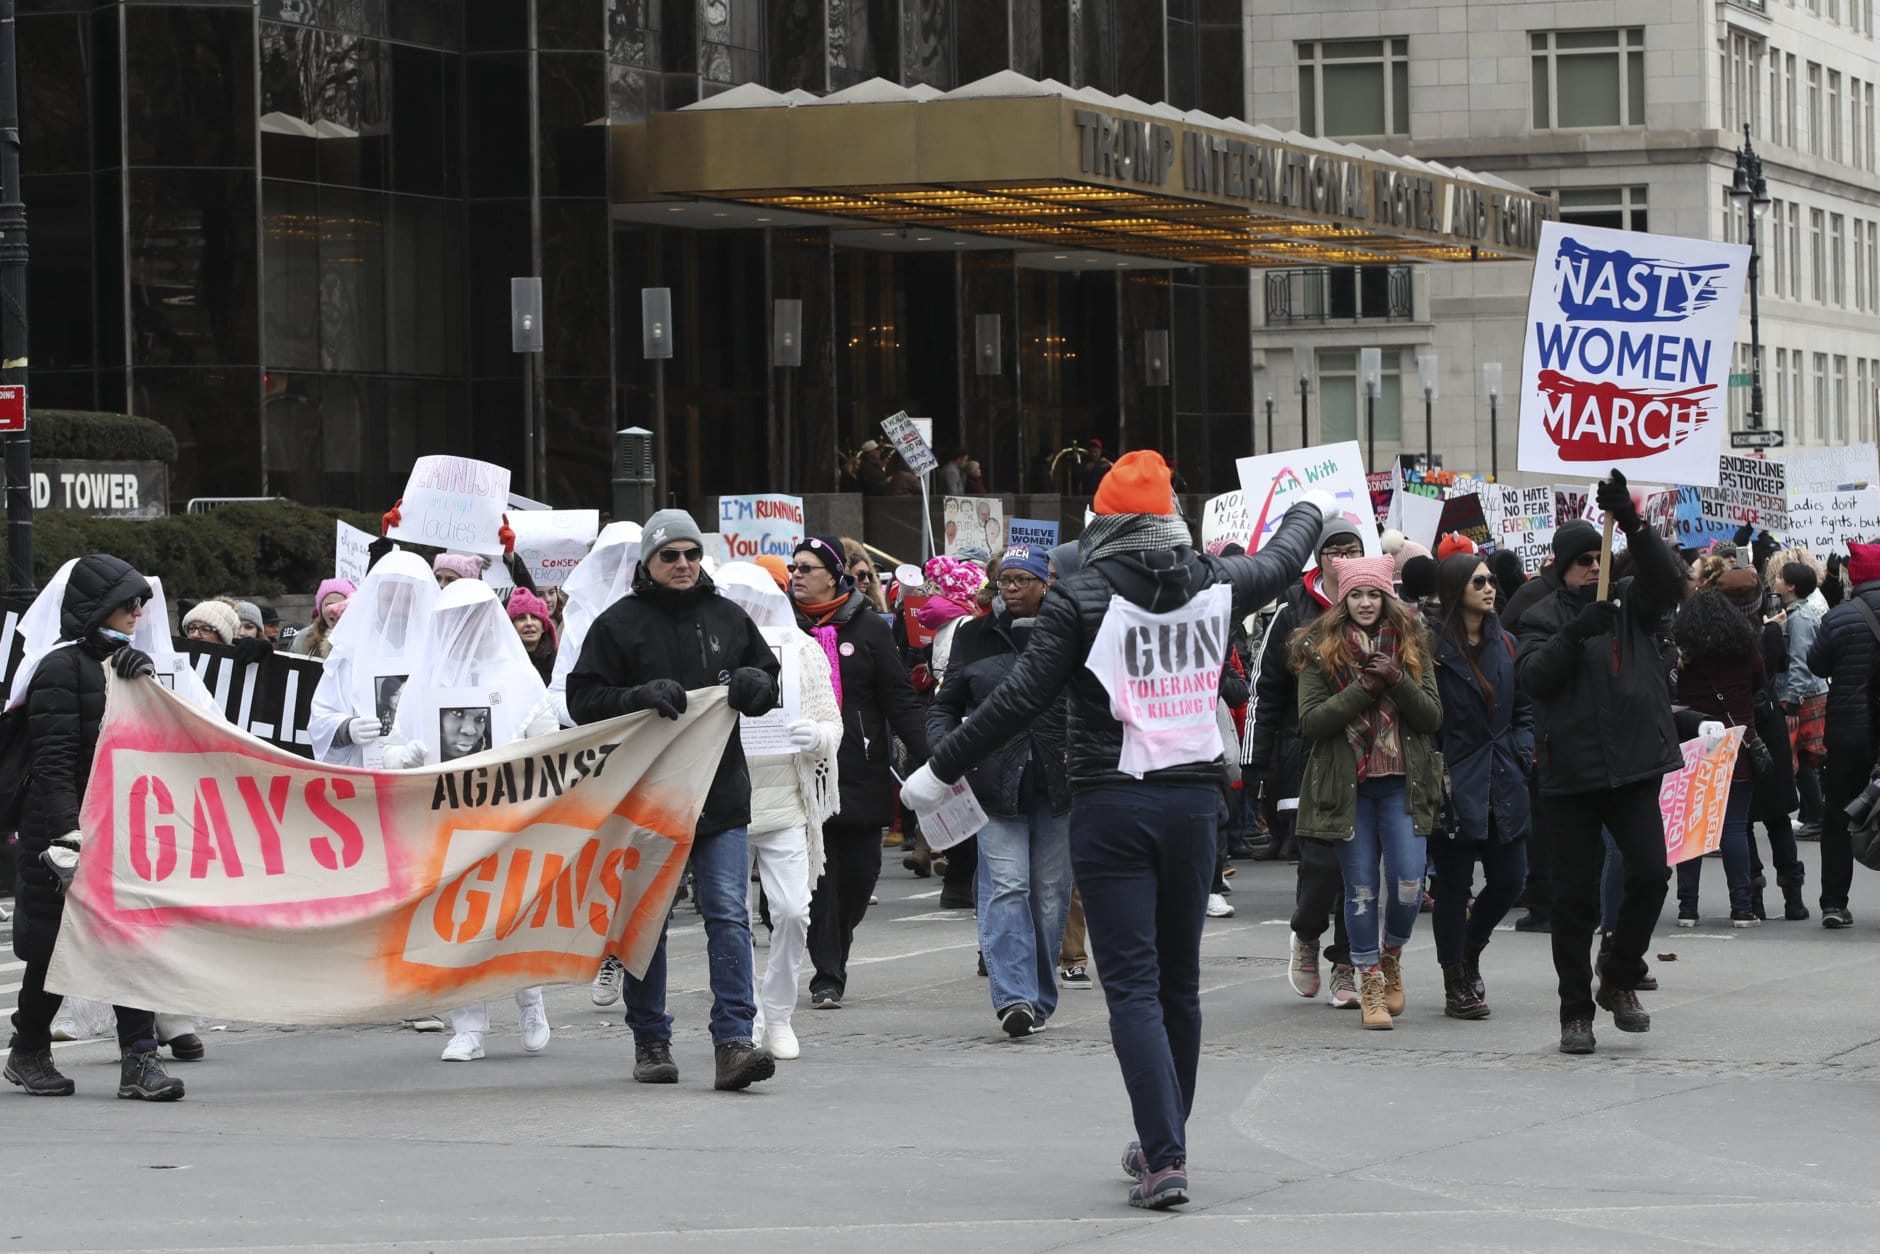 Demonstrators march past the Trump International Hotel and Tower during the Women's March Alliance, Saturday, Jan. 19, 2019, in New York. (AP Photo/Mary Altaffer)